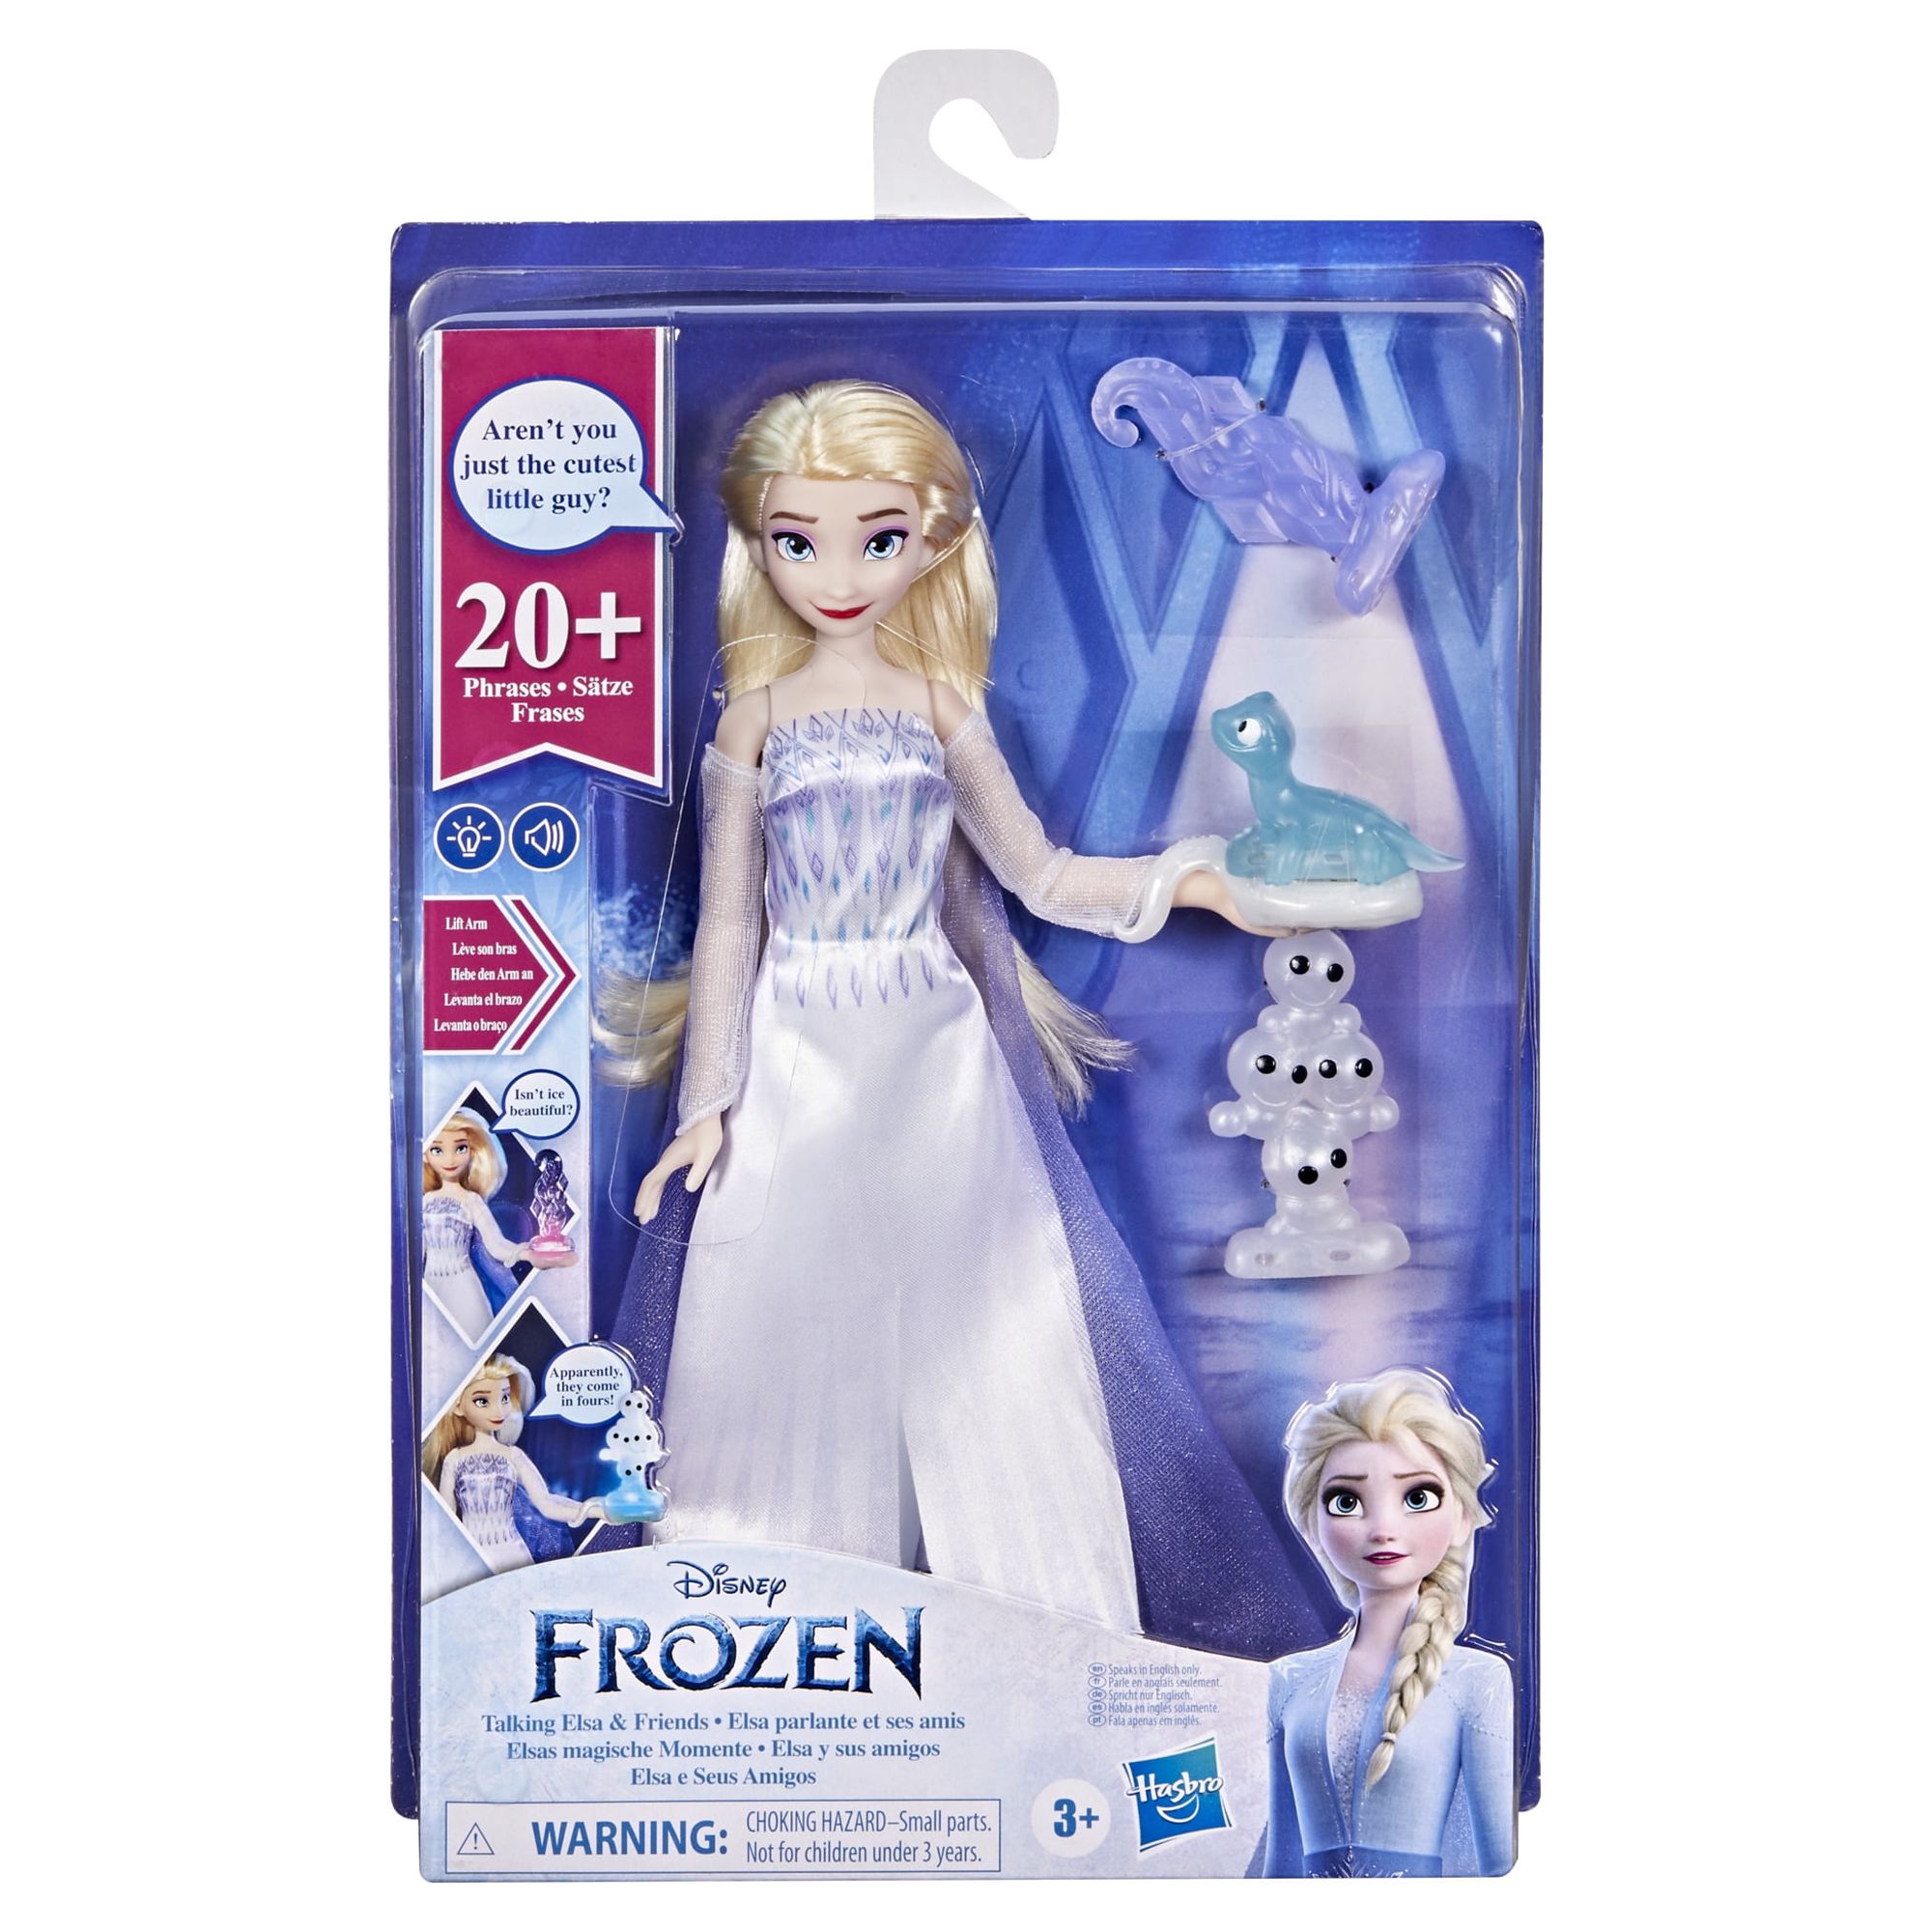 Disney's Frozen 2 Talking Elsa and Friends Elsa Doll, 20+ Sounds and Phrases - image 2 of 5